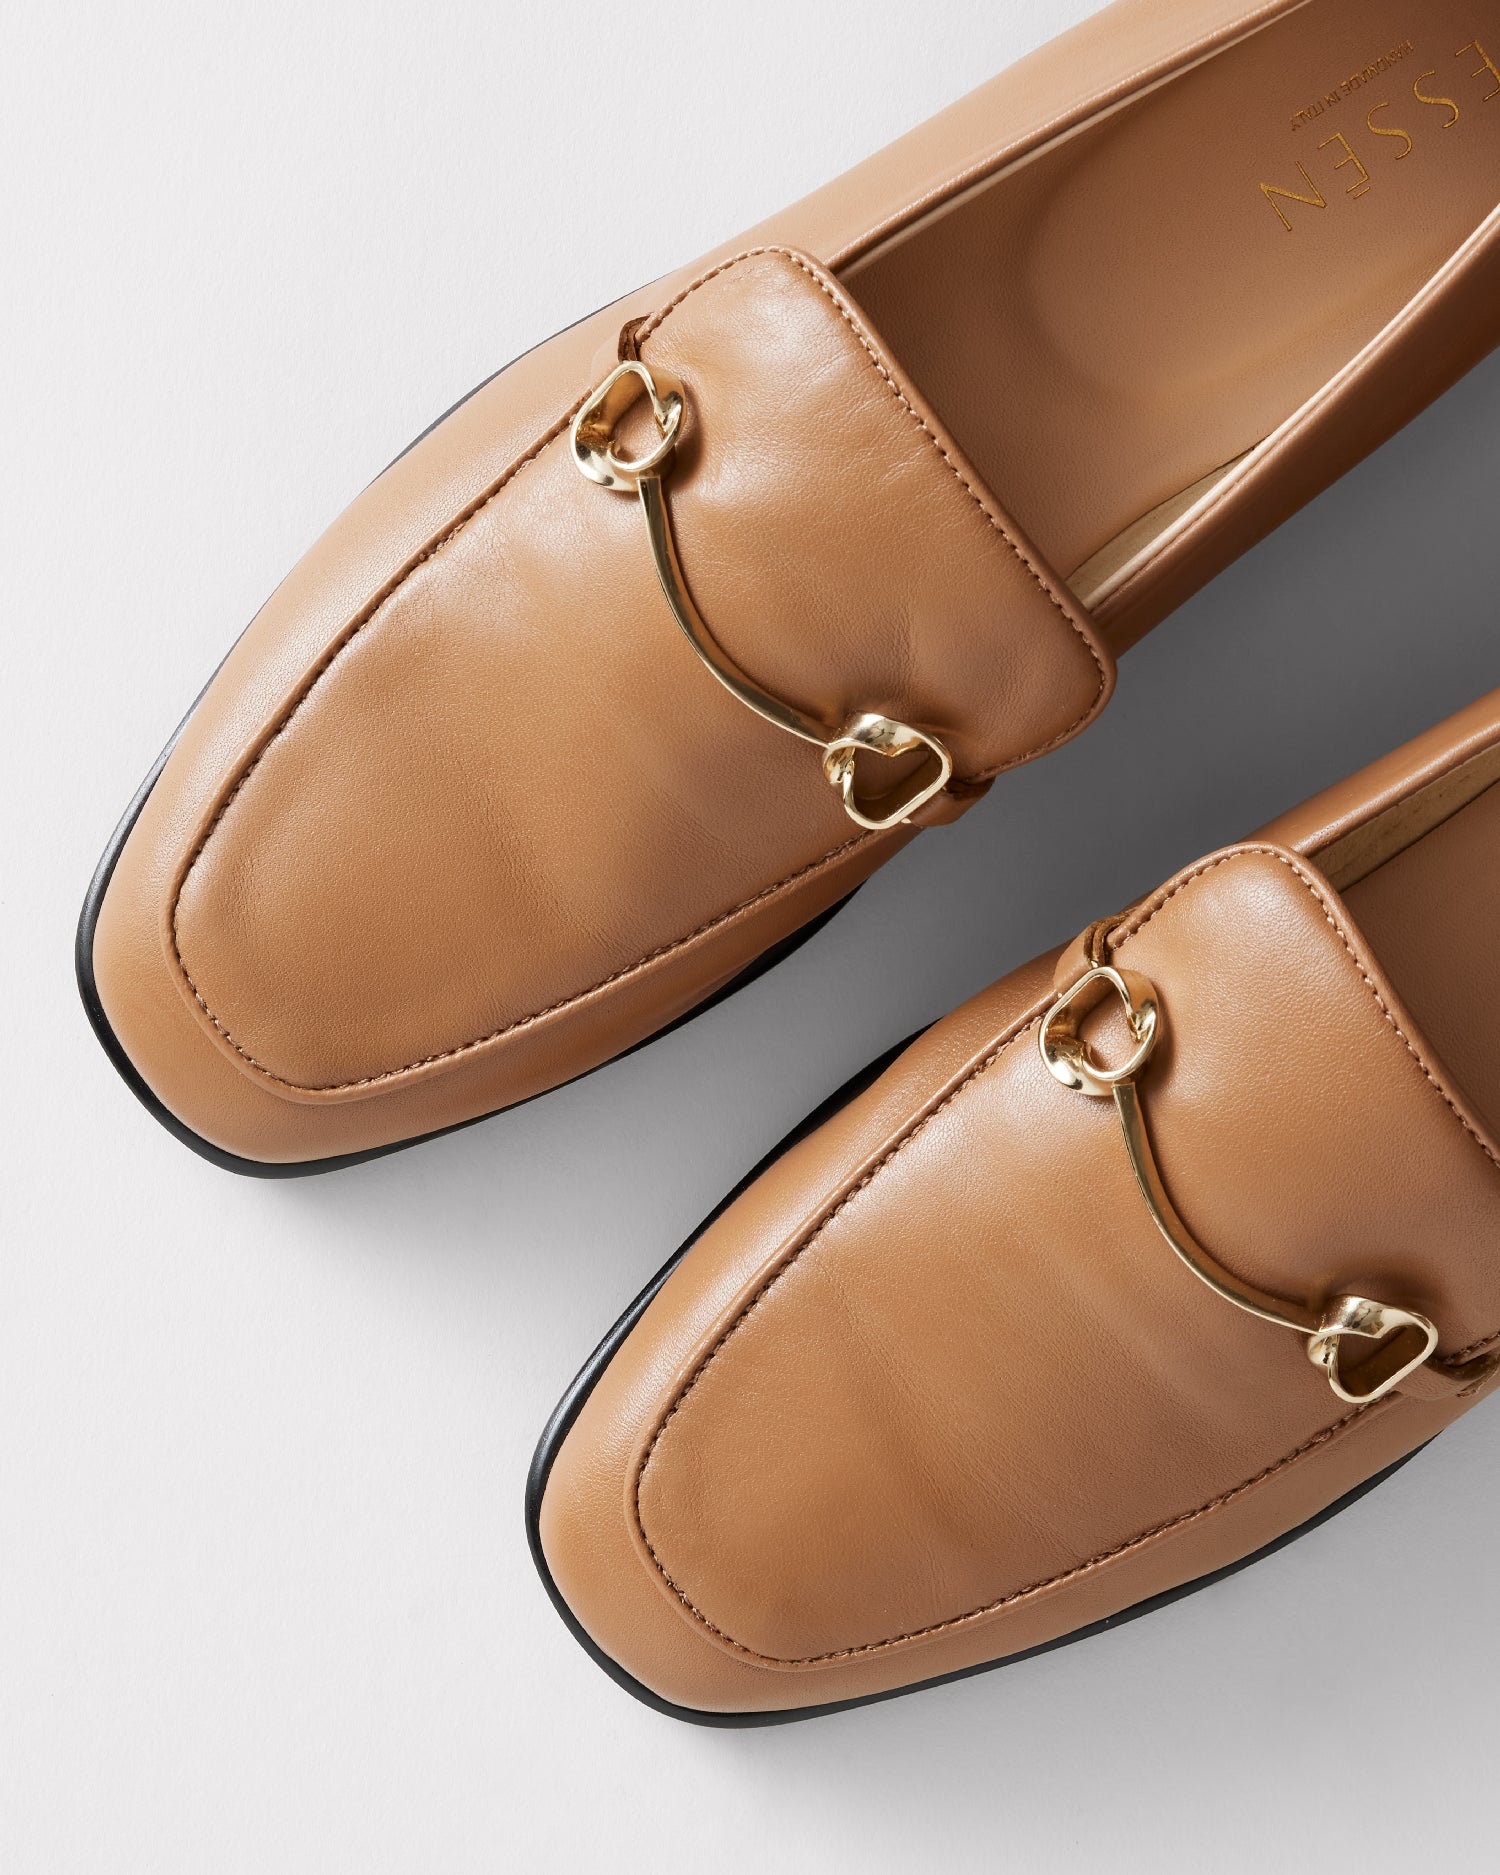 The Modern Moccasin - Tan With Hardware